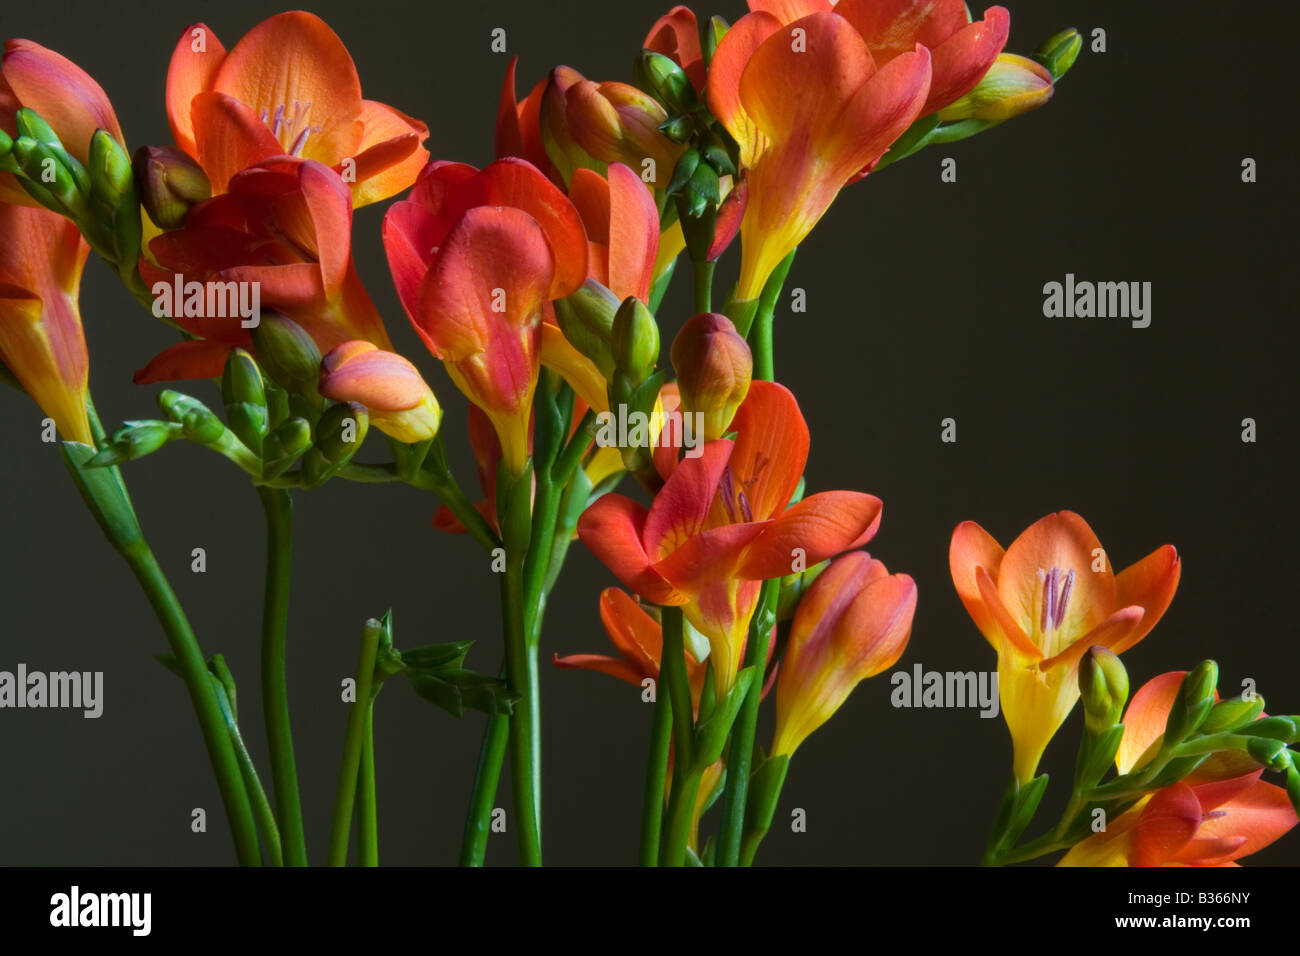 cut red freesia flowers photographed low key Stock Photo